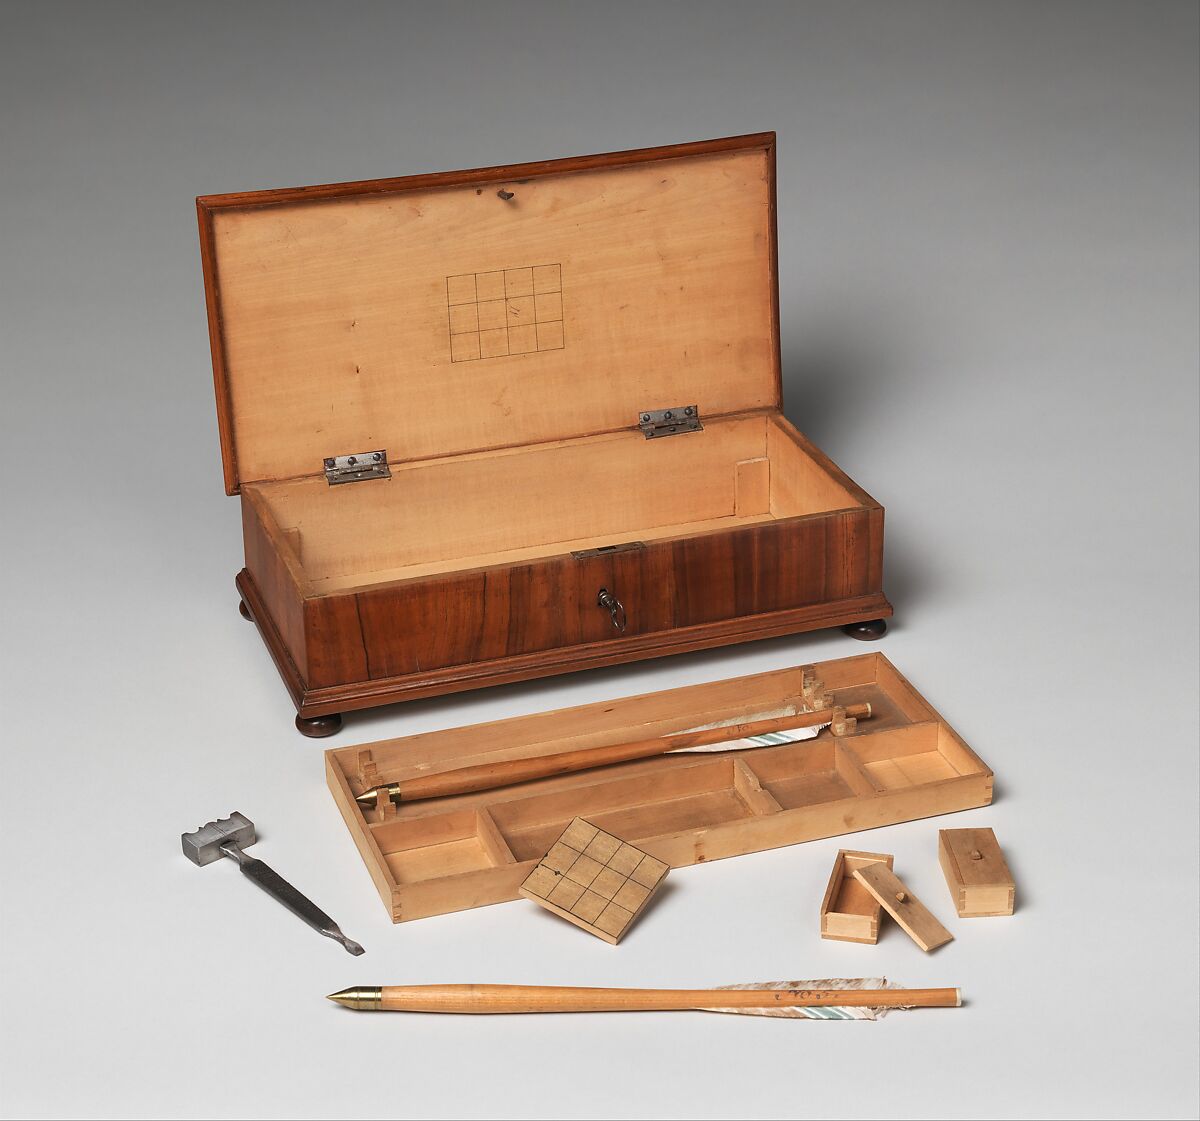 Crossbow Bolt Box (Bolzenkasten) with Accessories, Wood (poplar, walnut, plum, ash), steel, iron alloy, copper alloy, staghorn, feathers (probably goose), German, probably Dresden 